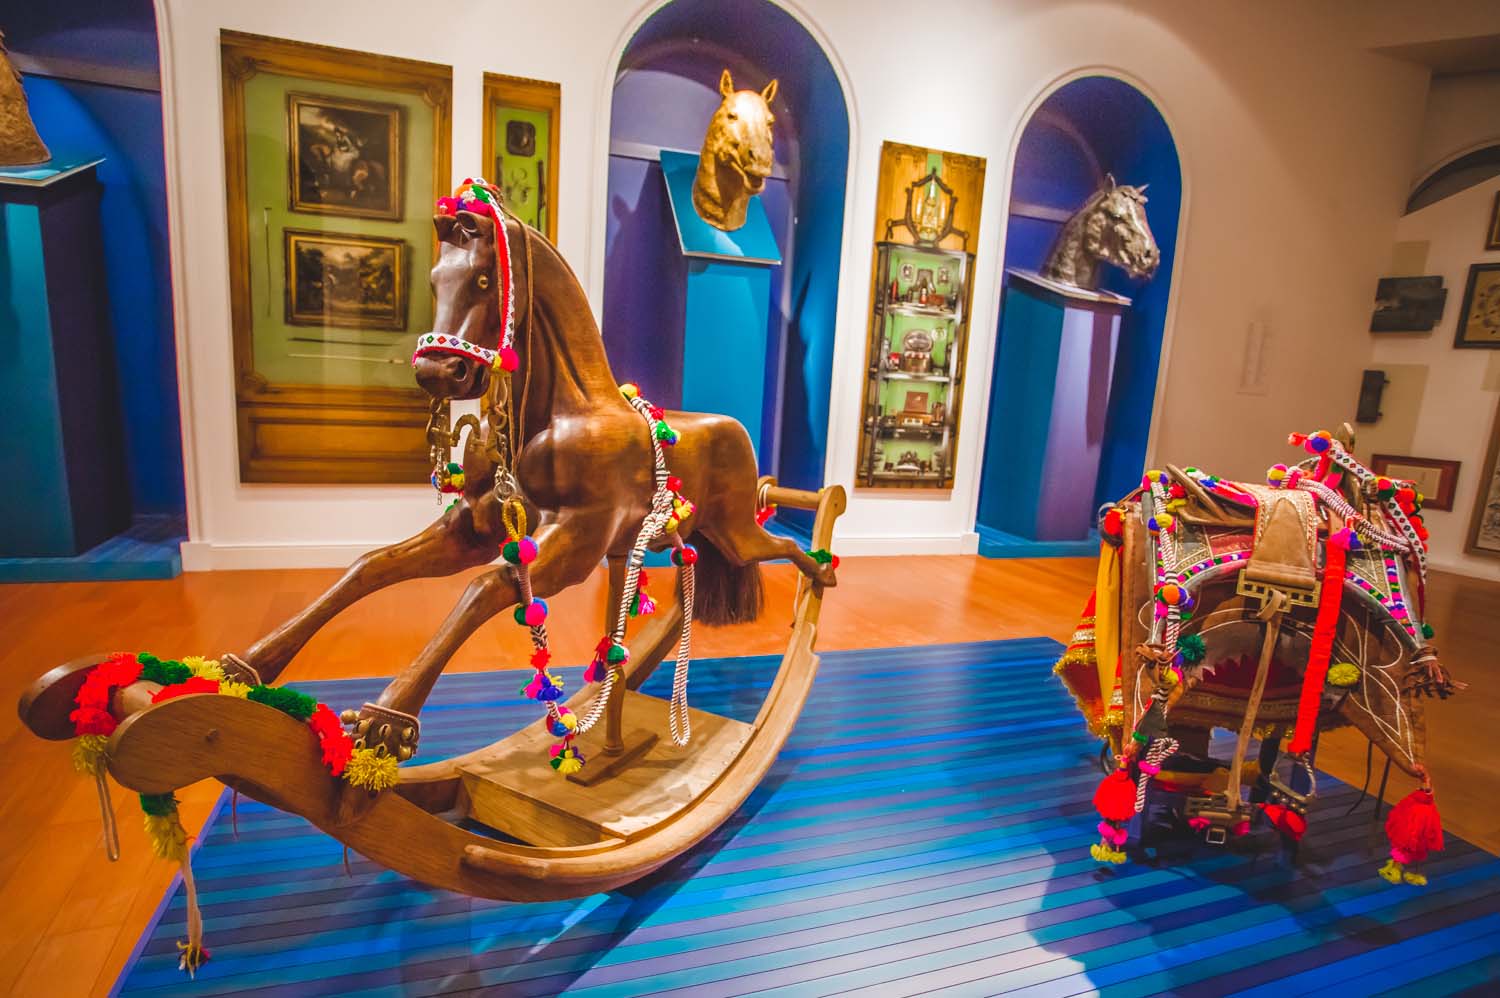 Replica of the original rocking horse that has been in the Hermès family for 6 generations